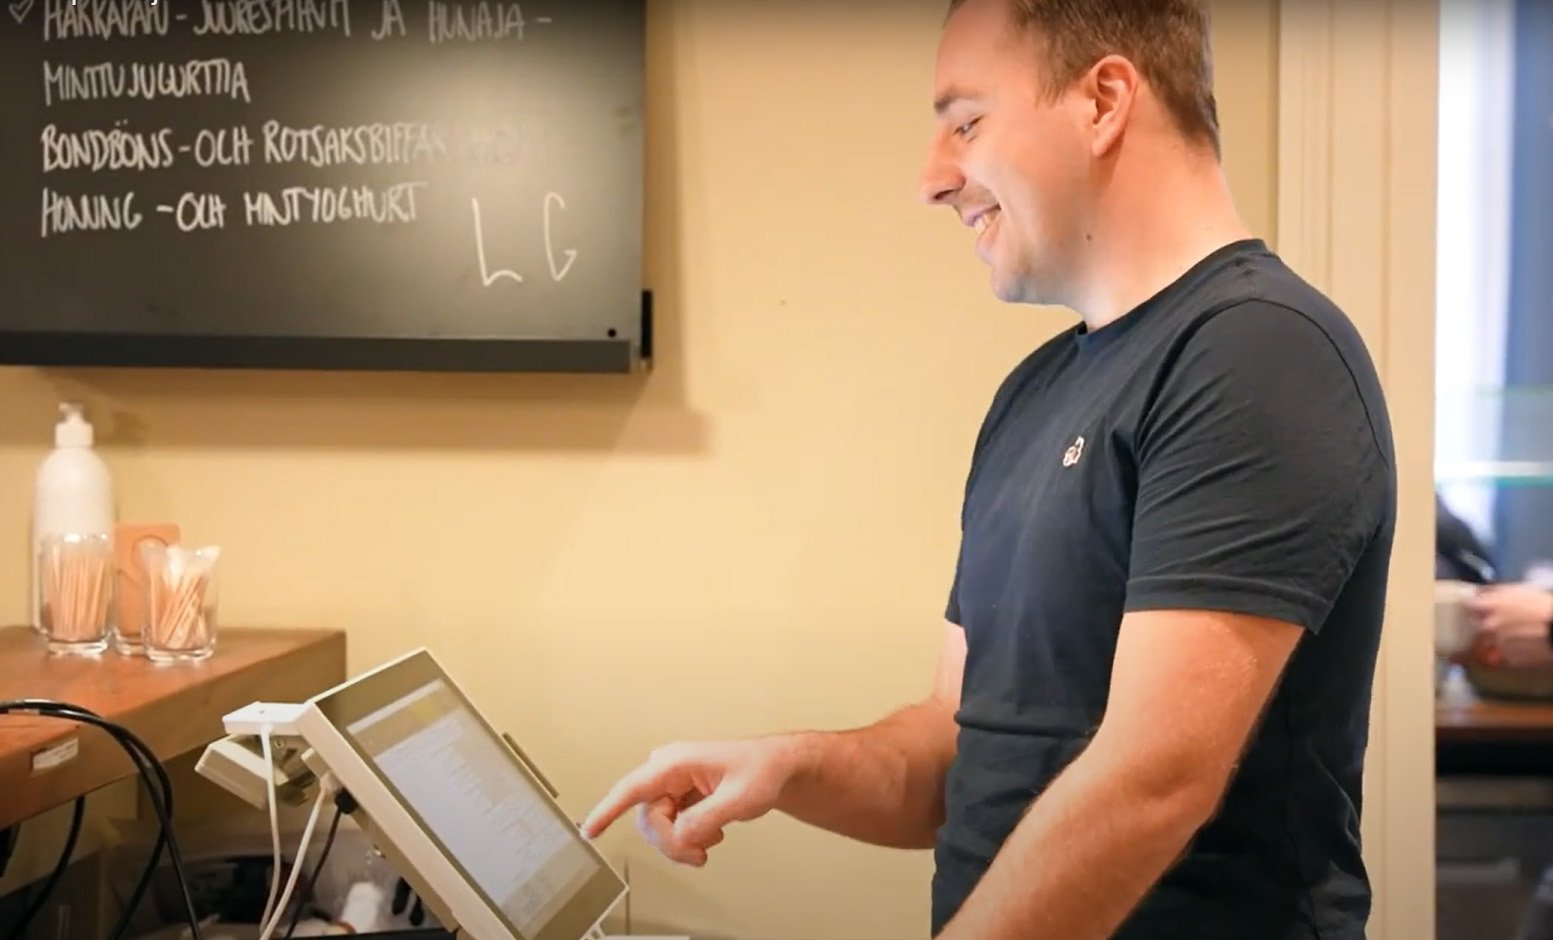 Joona Terävä, System Specialist, VoiVeljet is using POS device behind the counter in a restaurant.